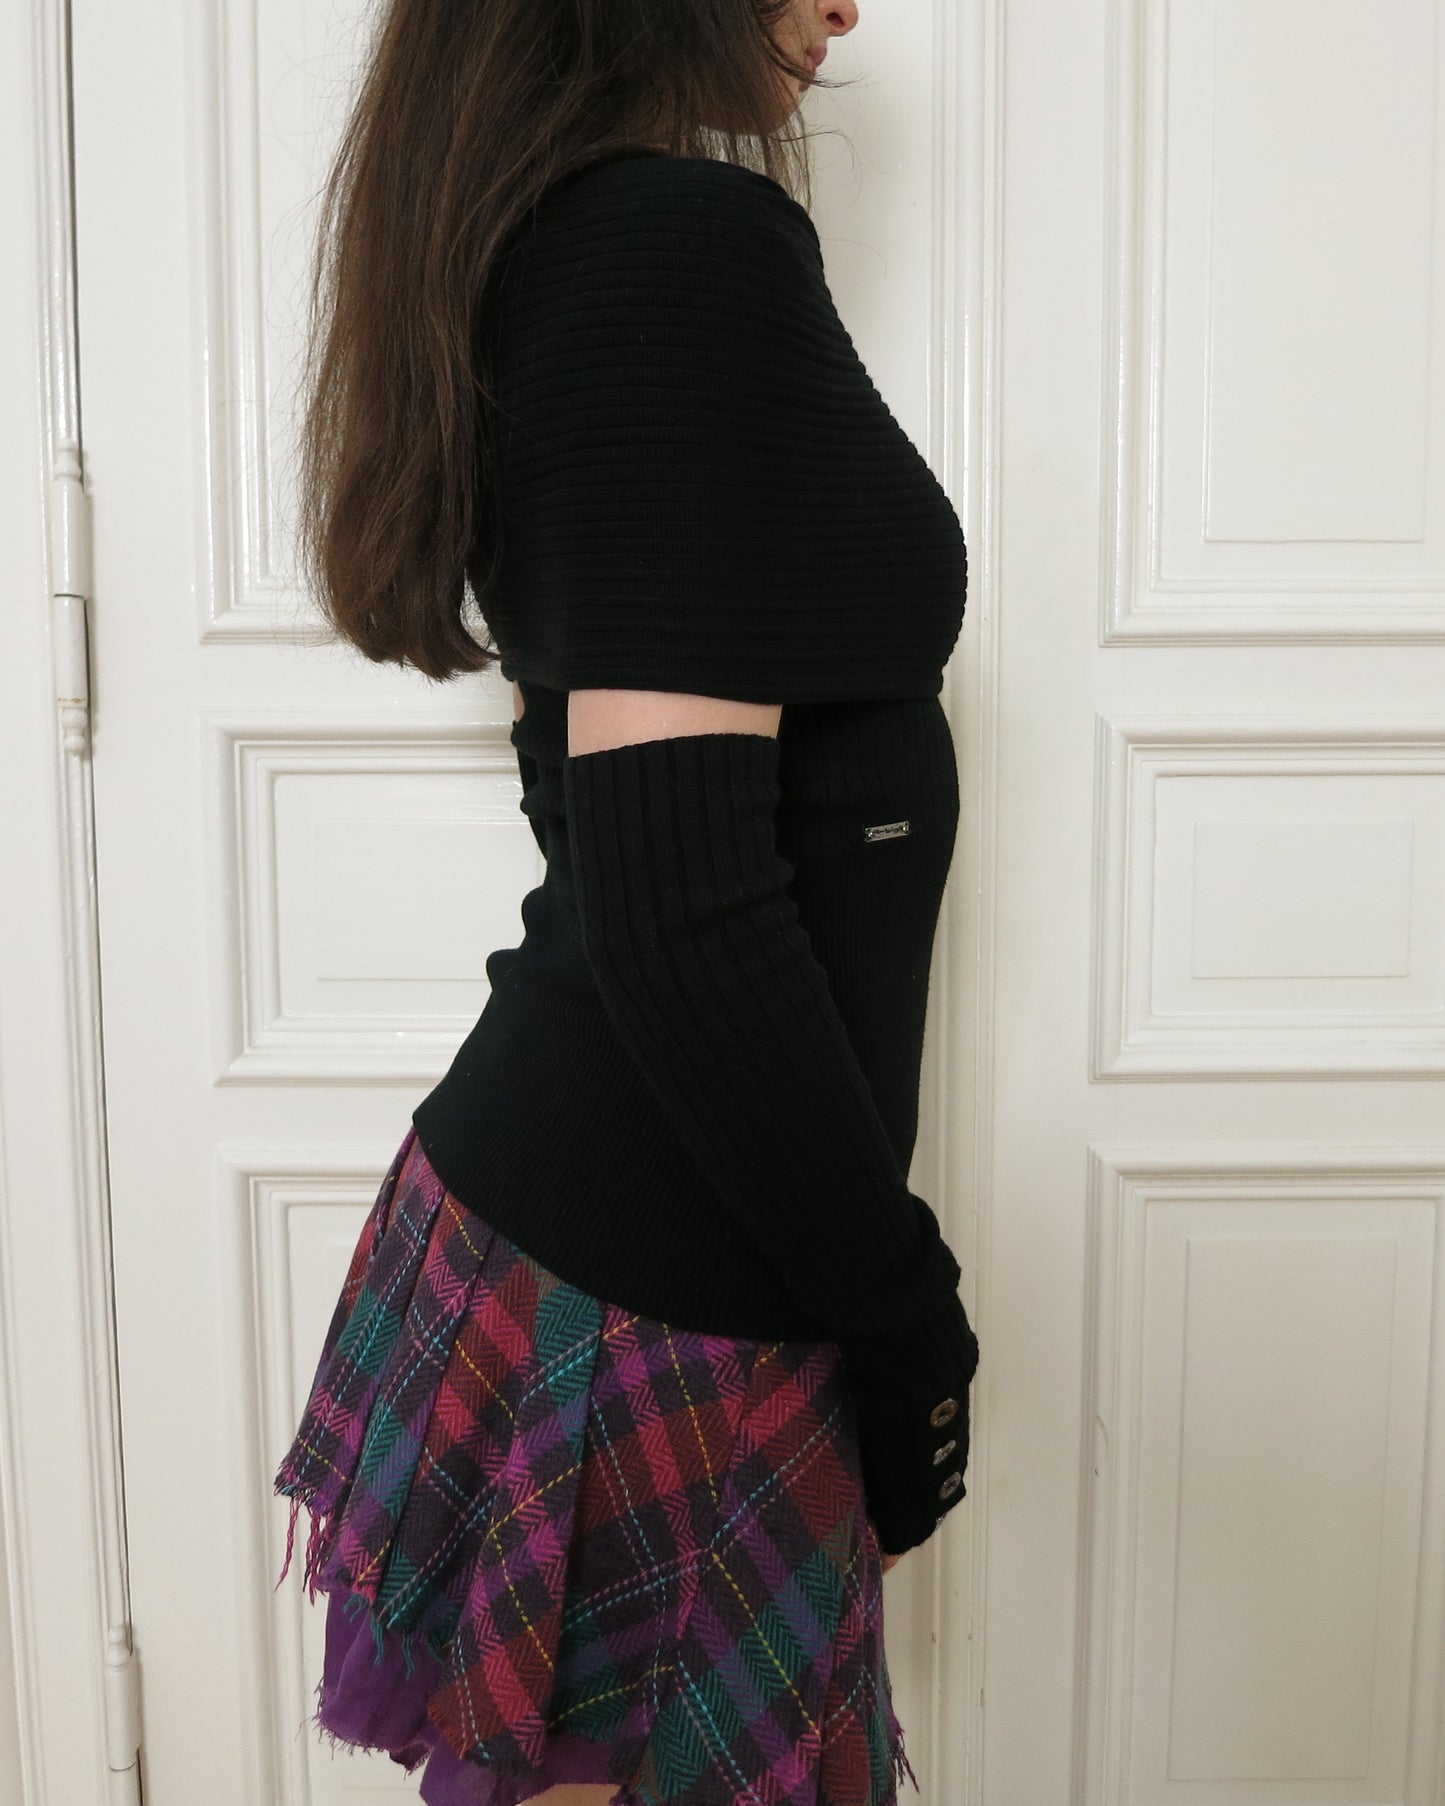 Knit top with matching arm warmers